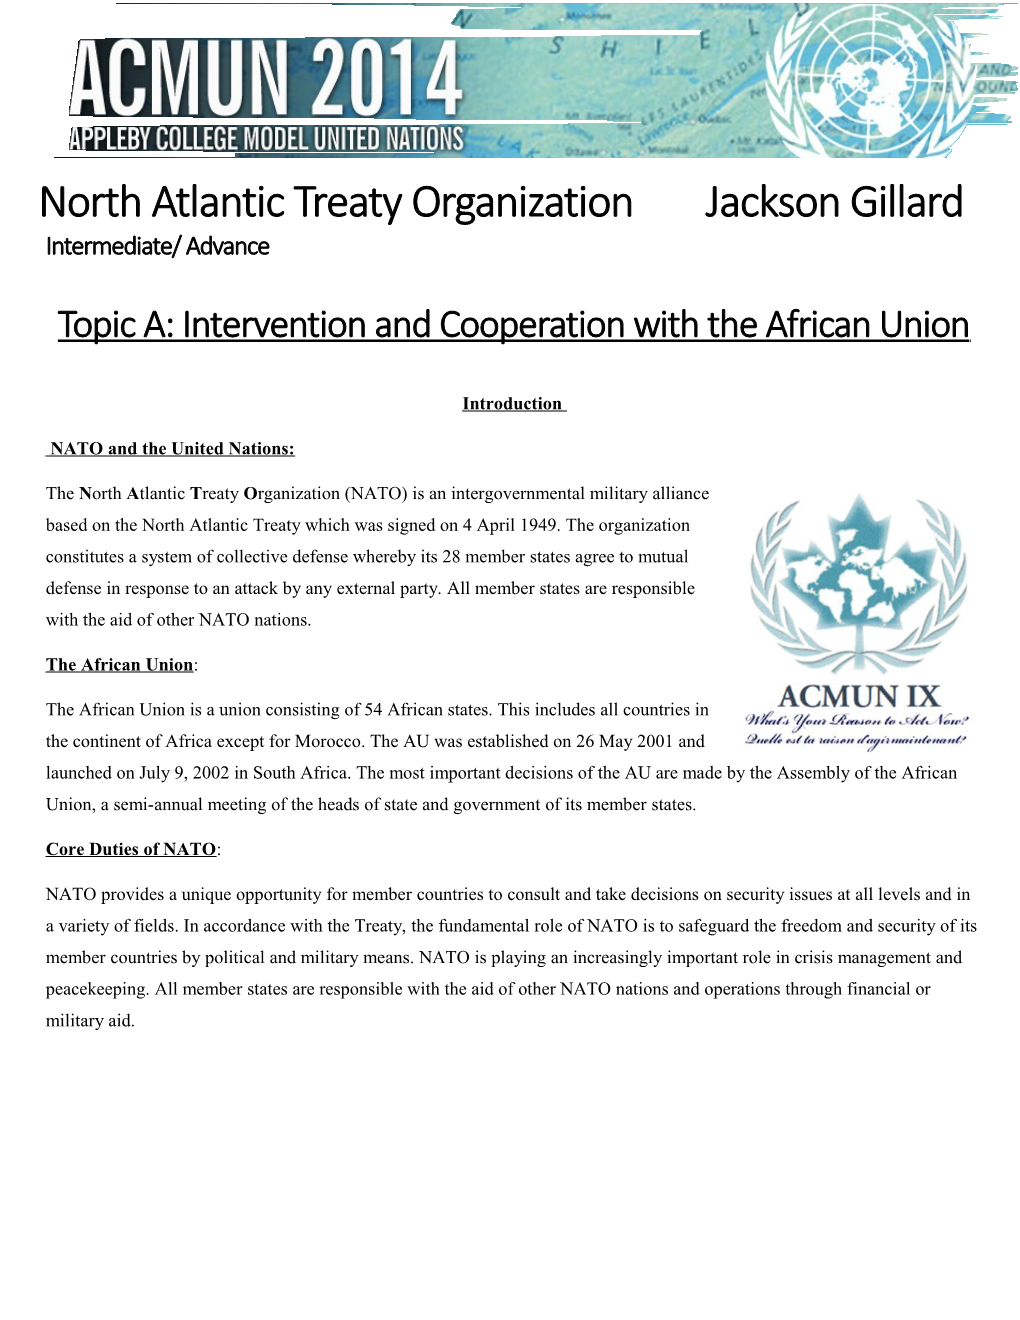 Topic A: Intervention and Cooperation with the African Union